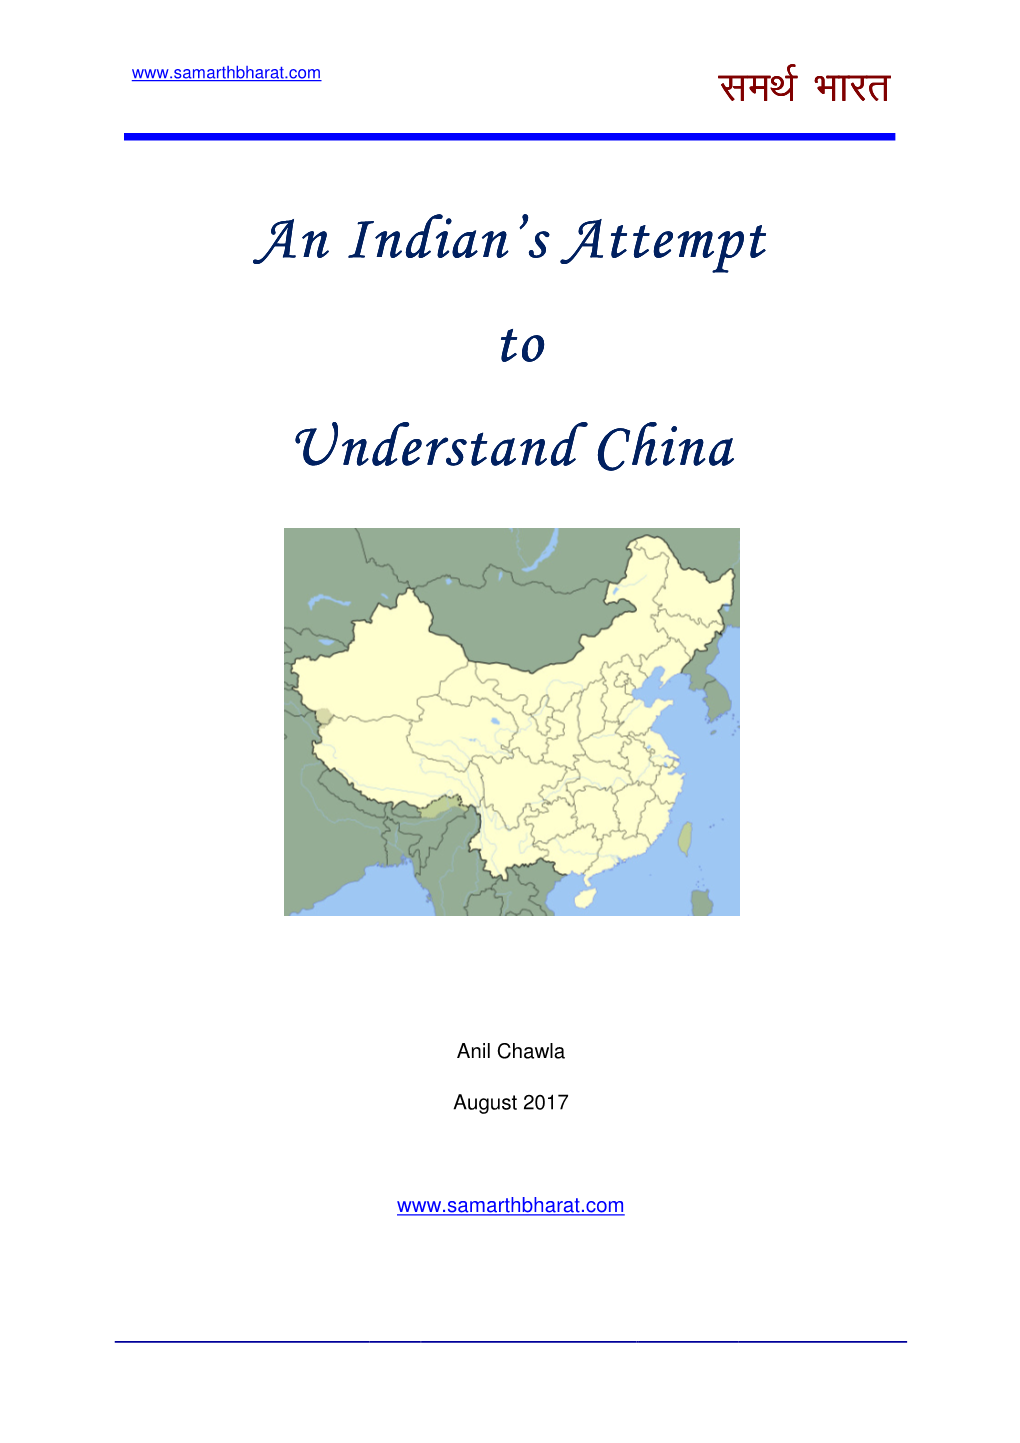 An Indian's Attempt to Understand China